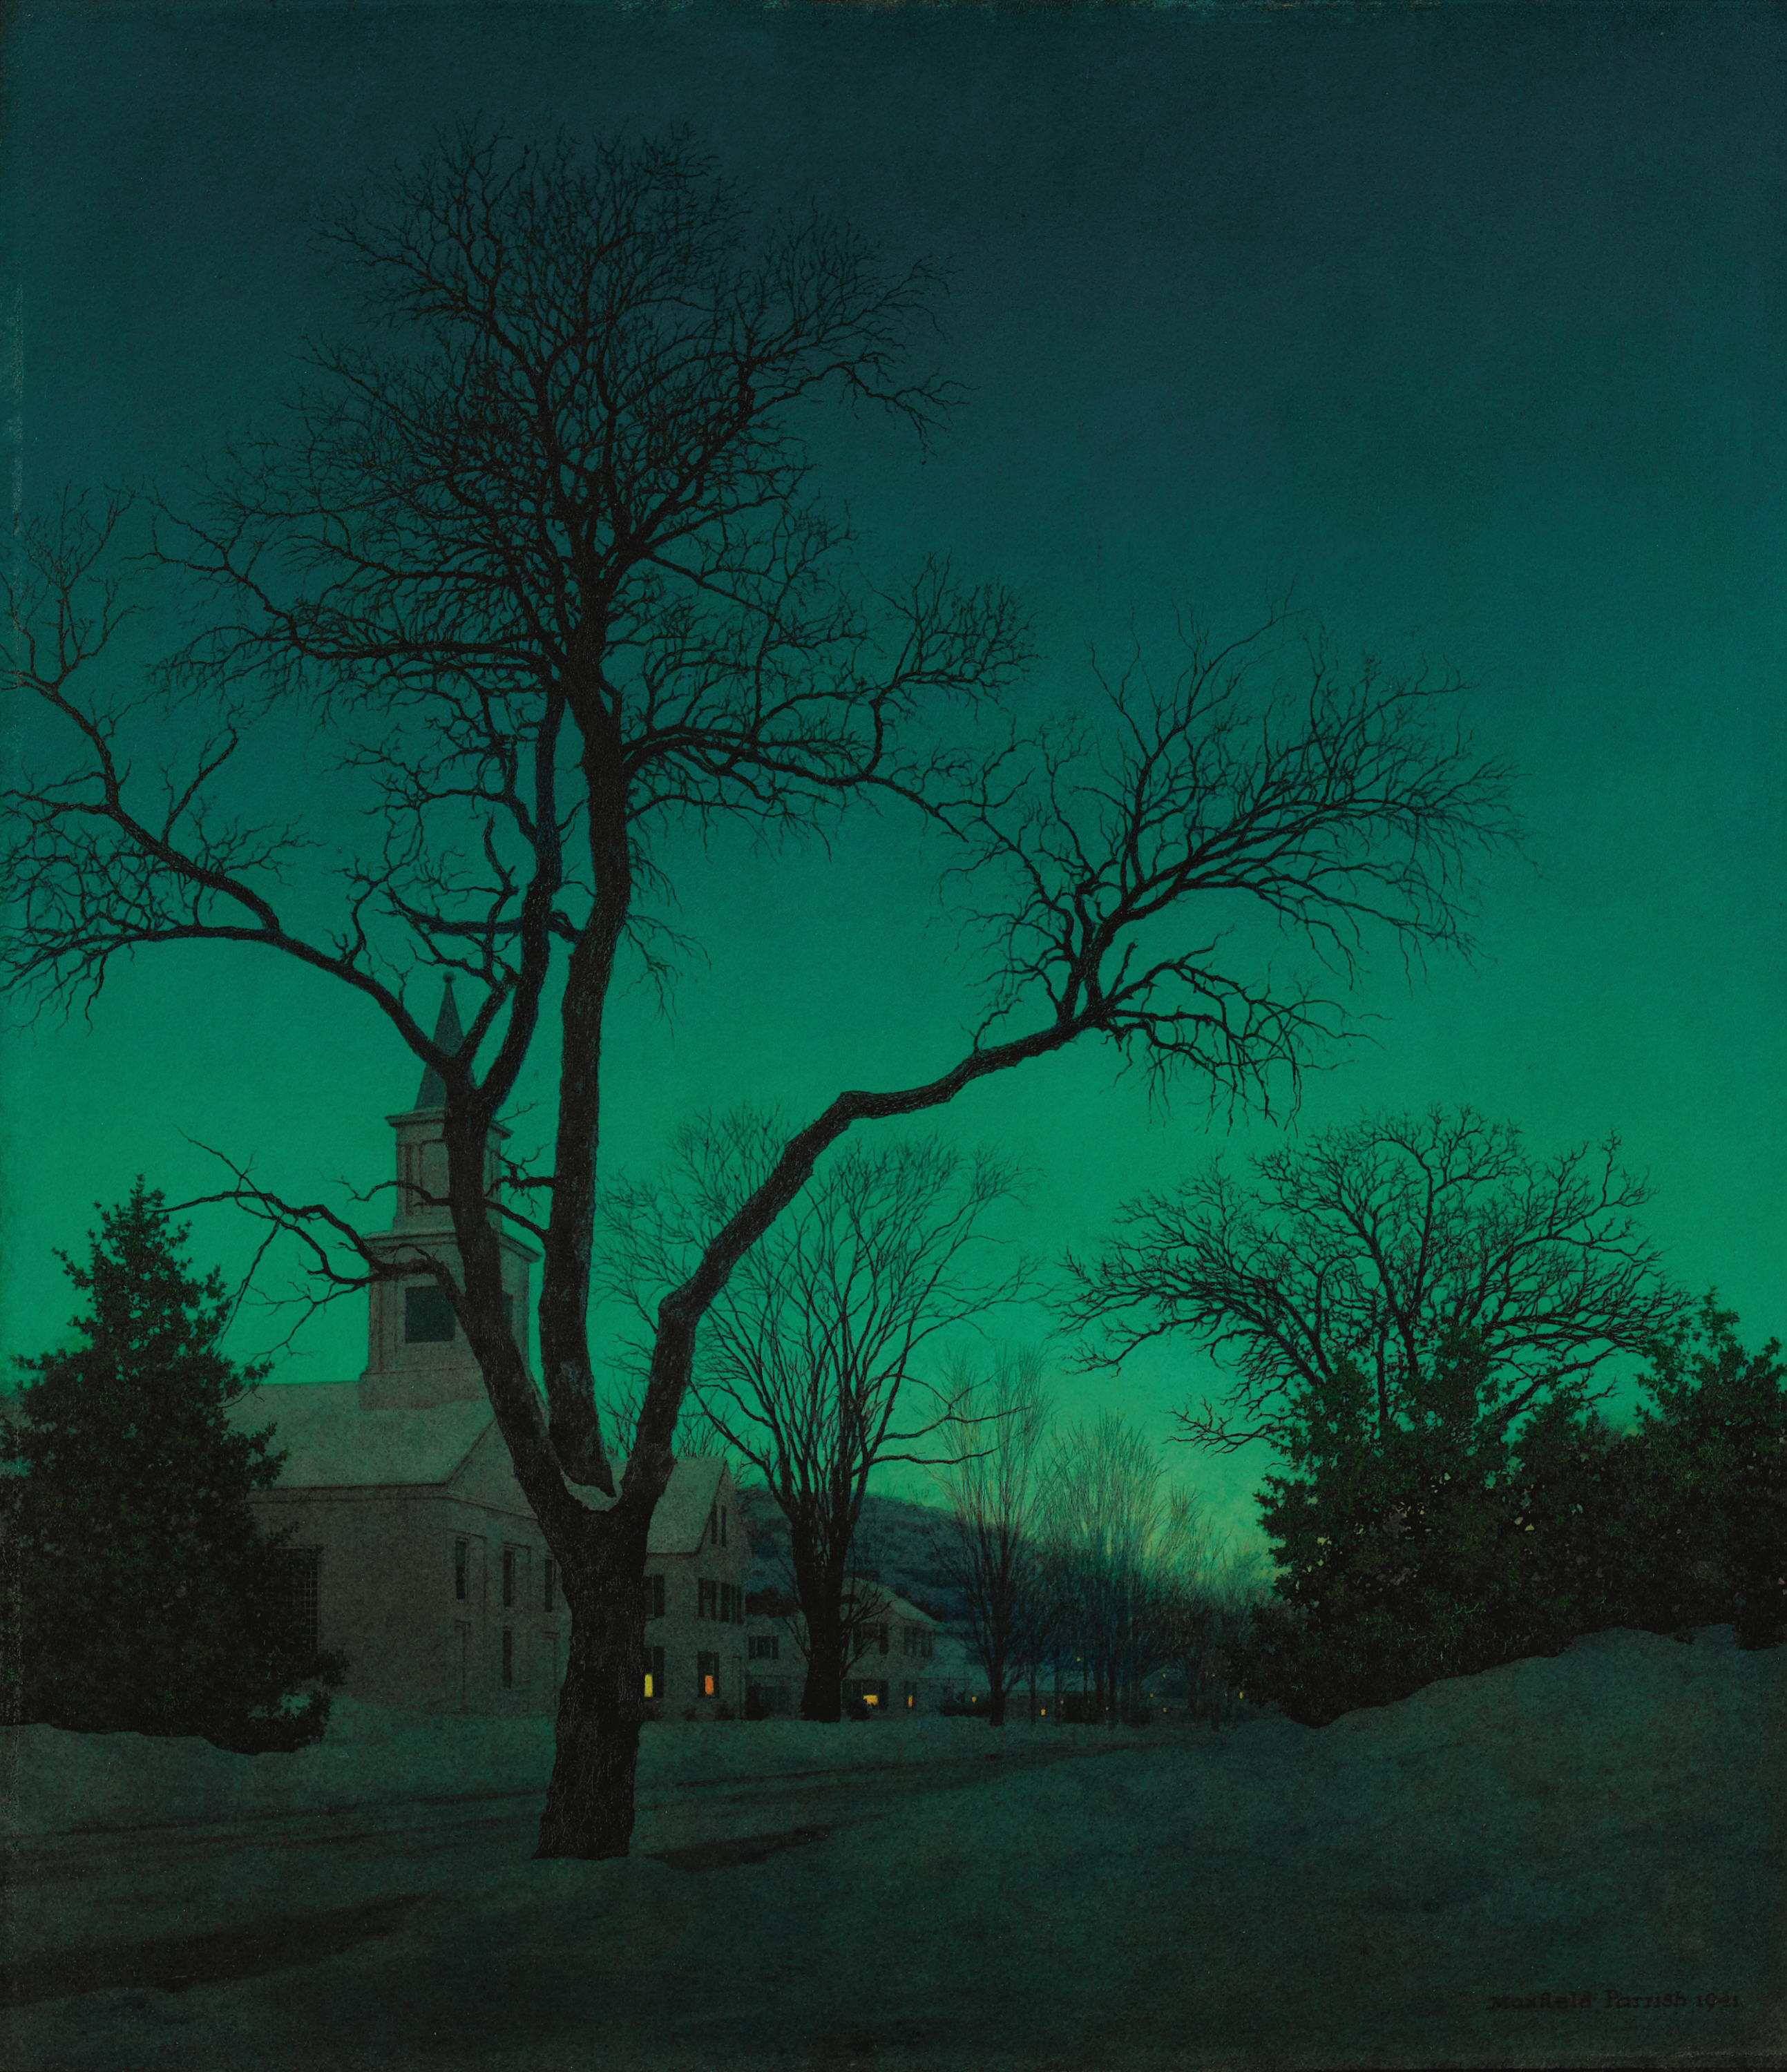 paintings, Maxfield Parrish - Free